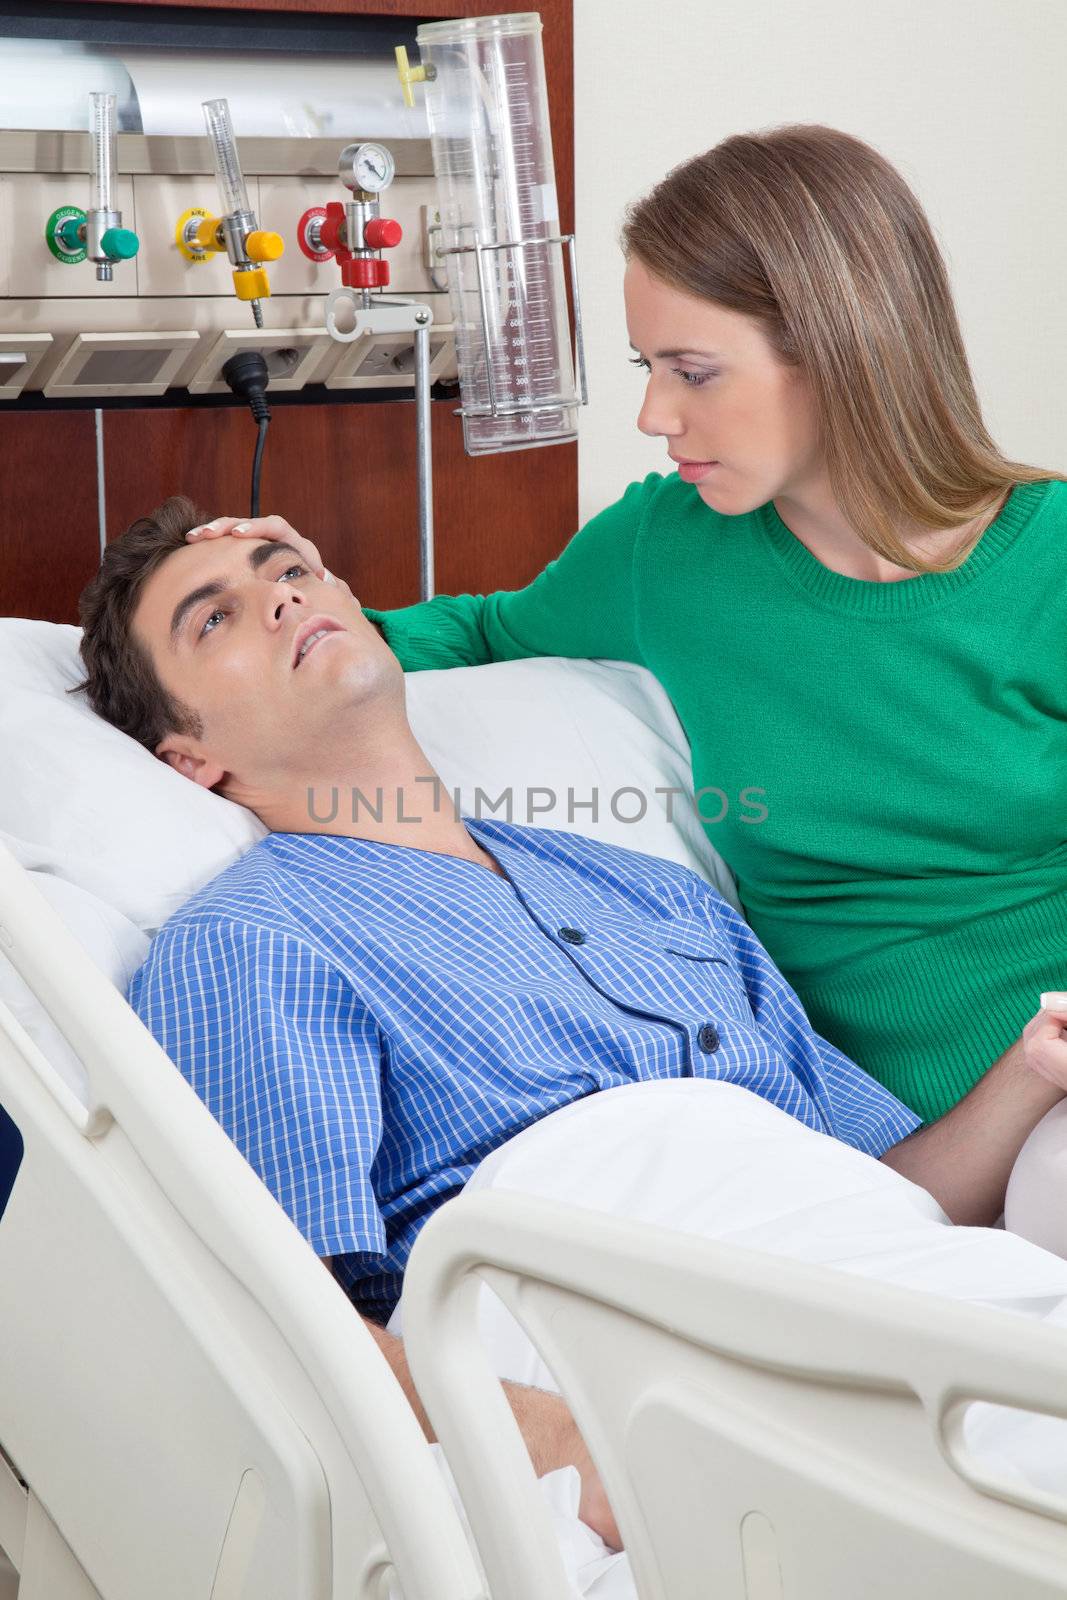 Sick patient with wife by leaf